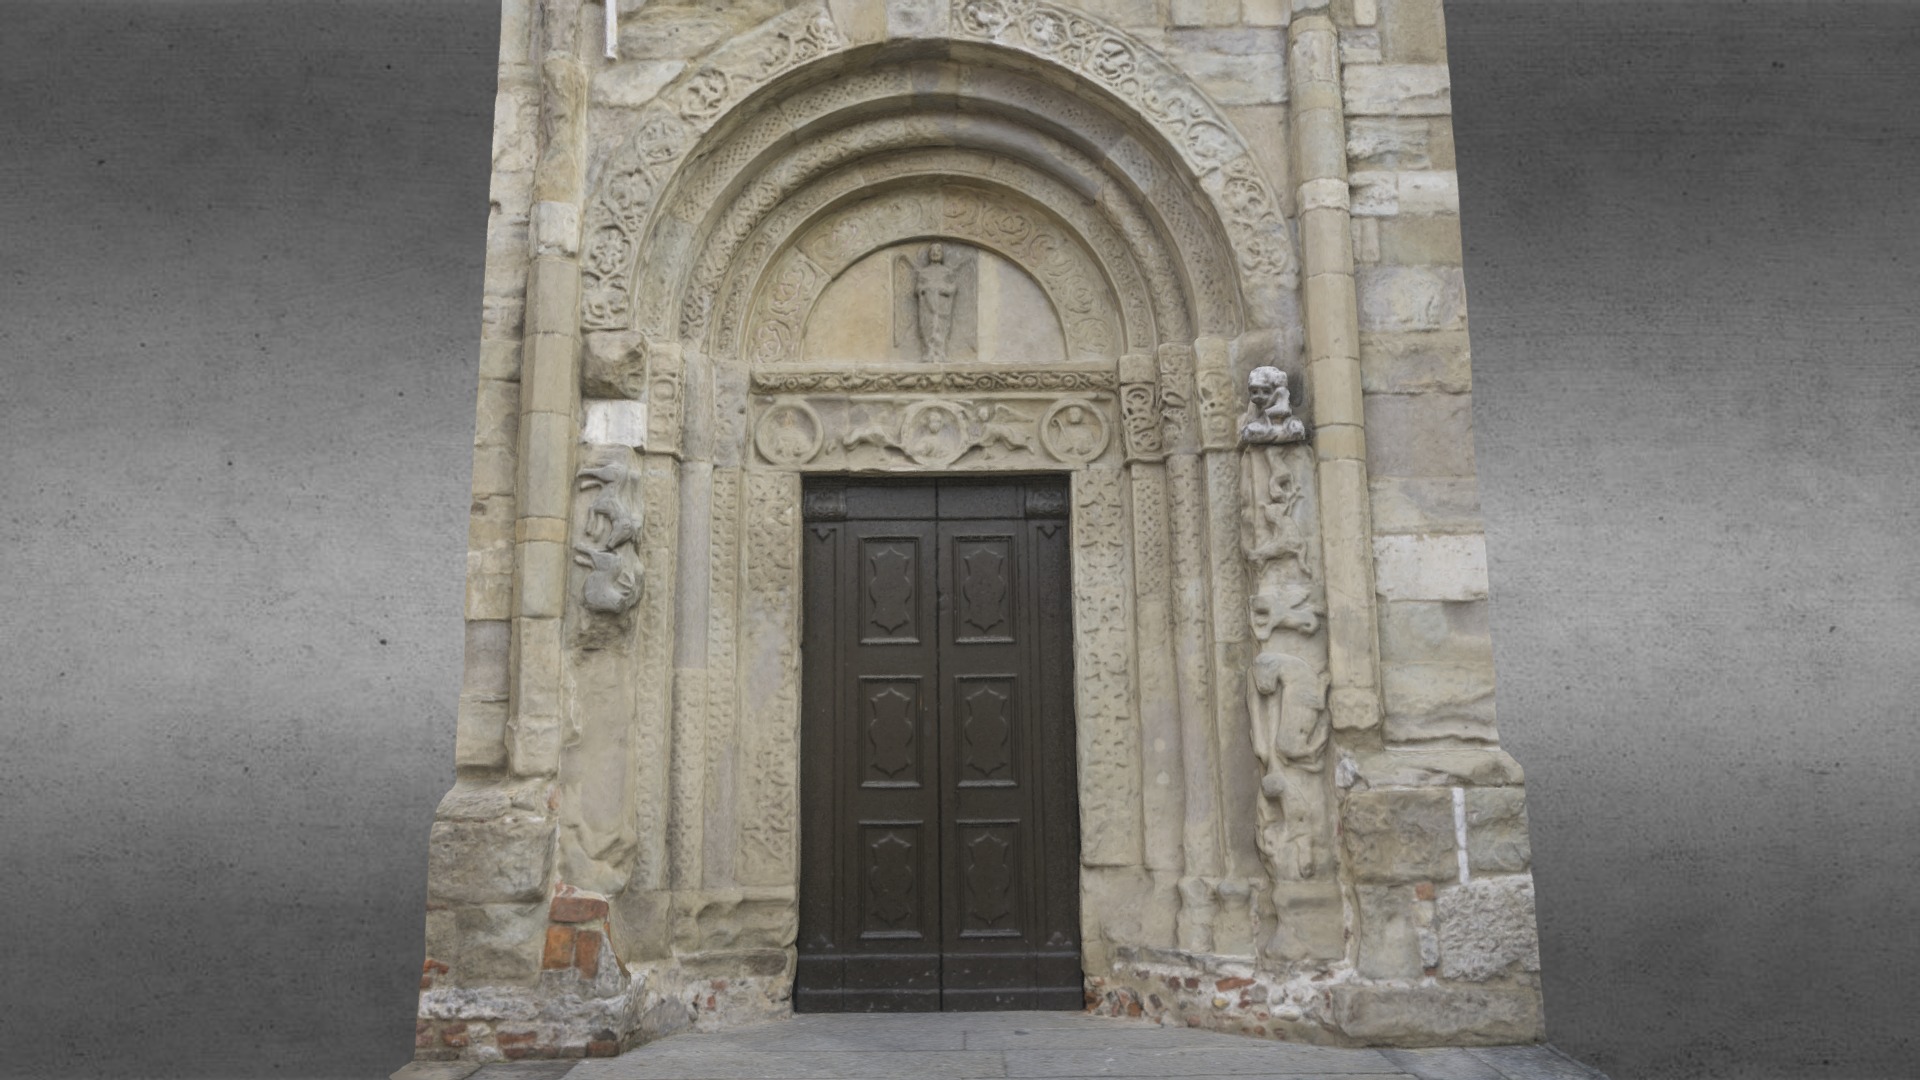 3D model San Michele – Pavia - This is a 3D model of the San Michele - Pavia. The 3D model is about a door in a stone building.